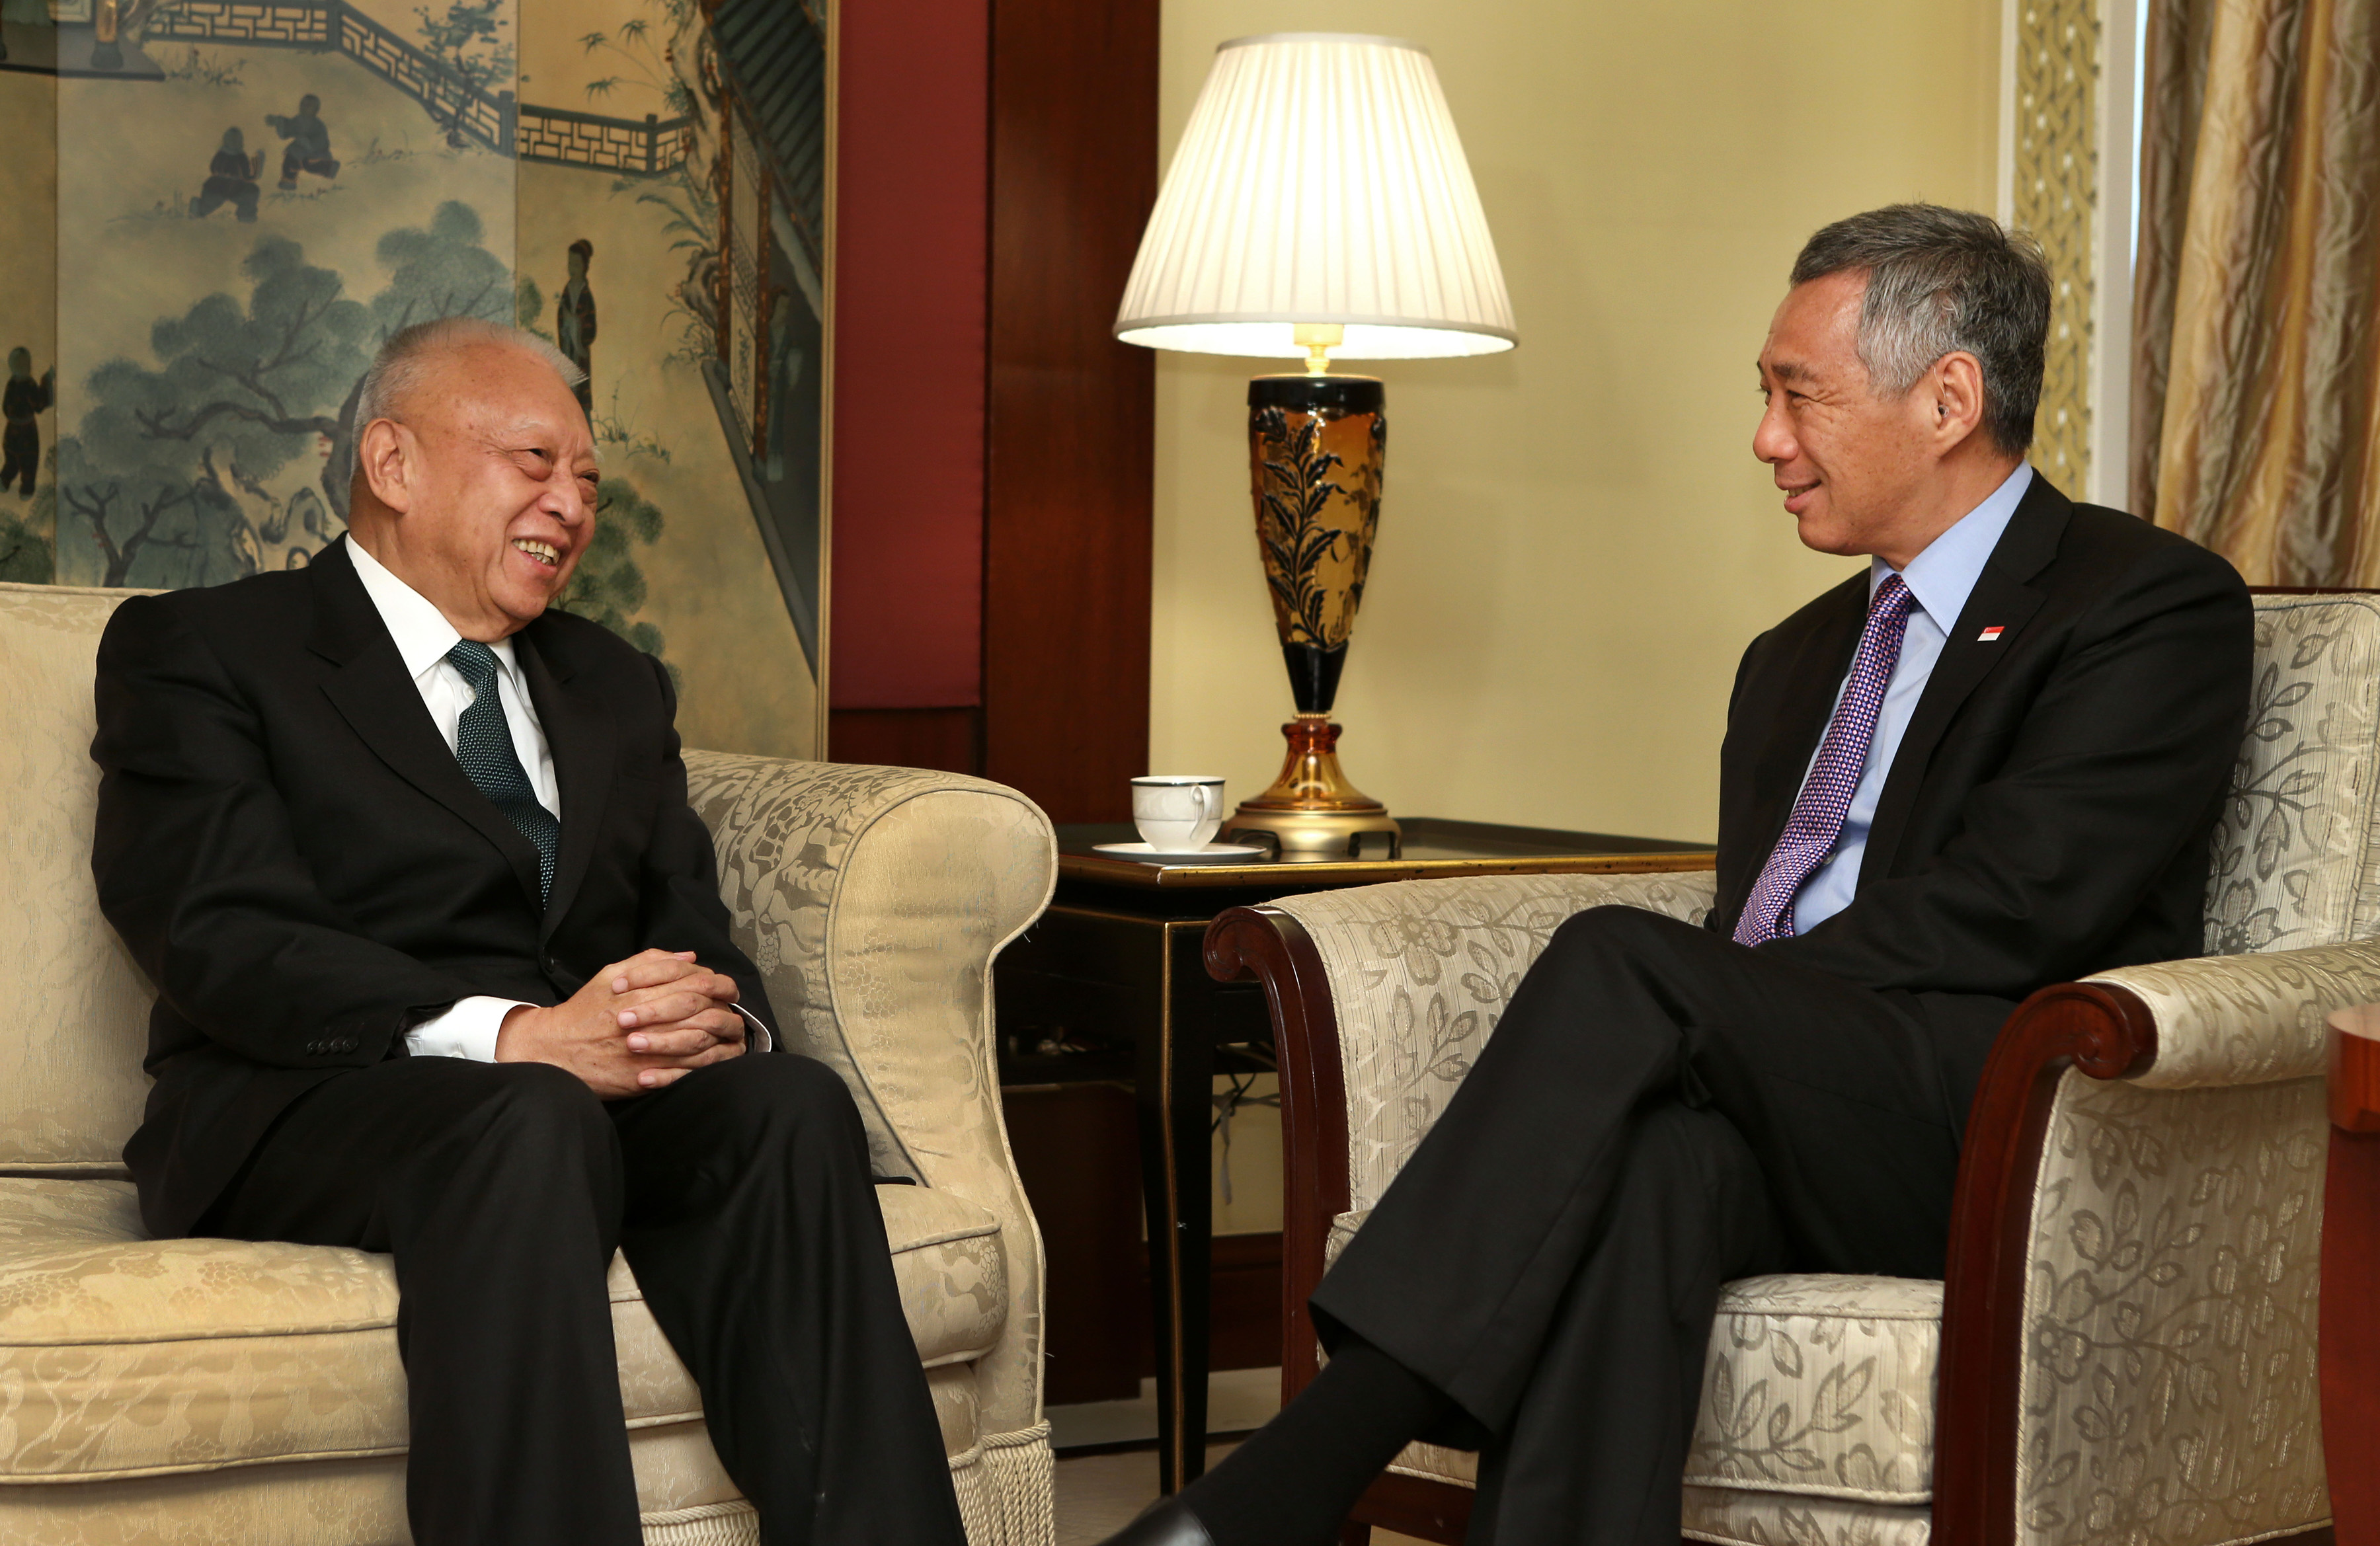 Visit of Prime Minister Lee Hsien Loong to China on 11 to 18 Sep 2014 (MCI Photo by Terence Tan)